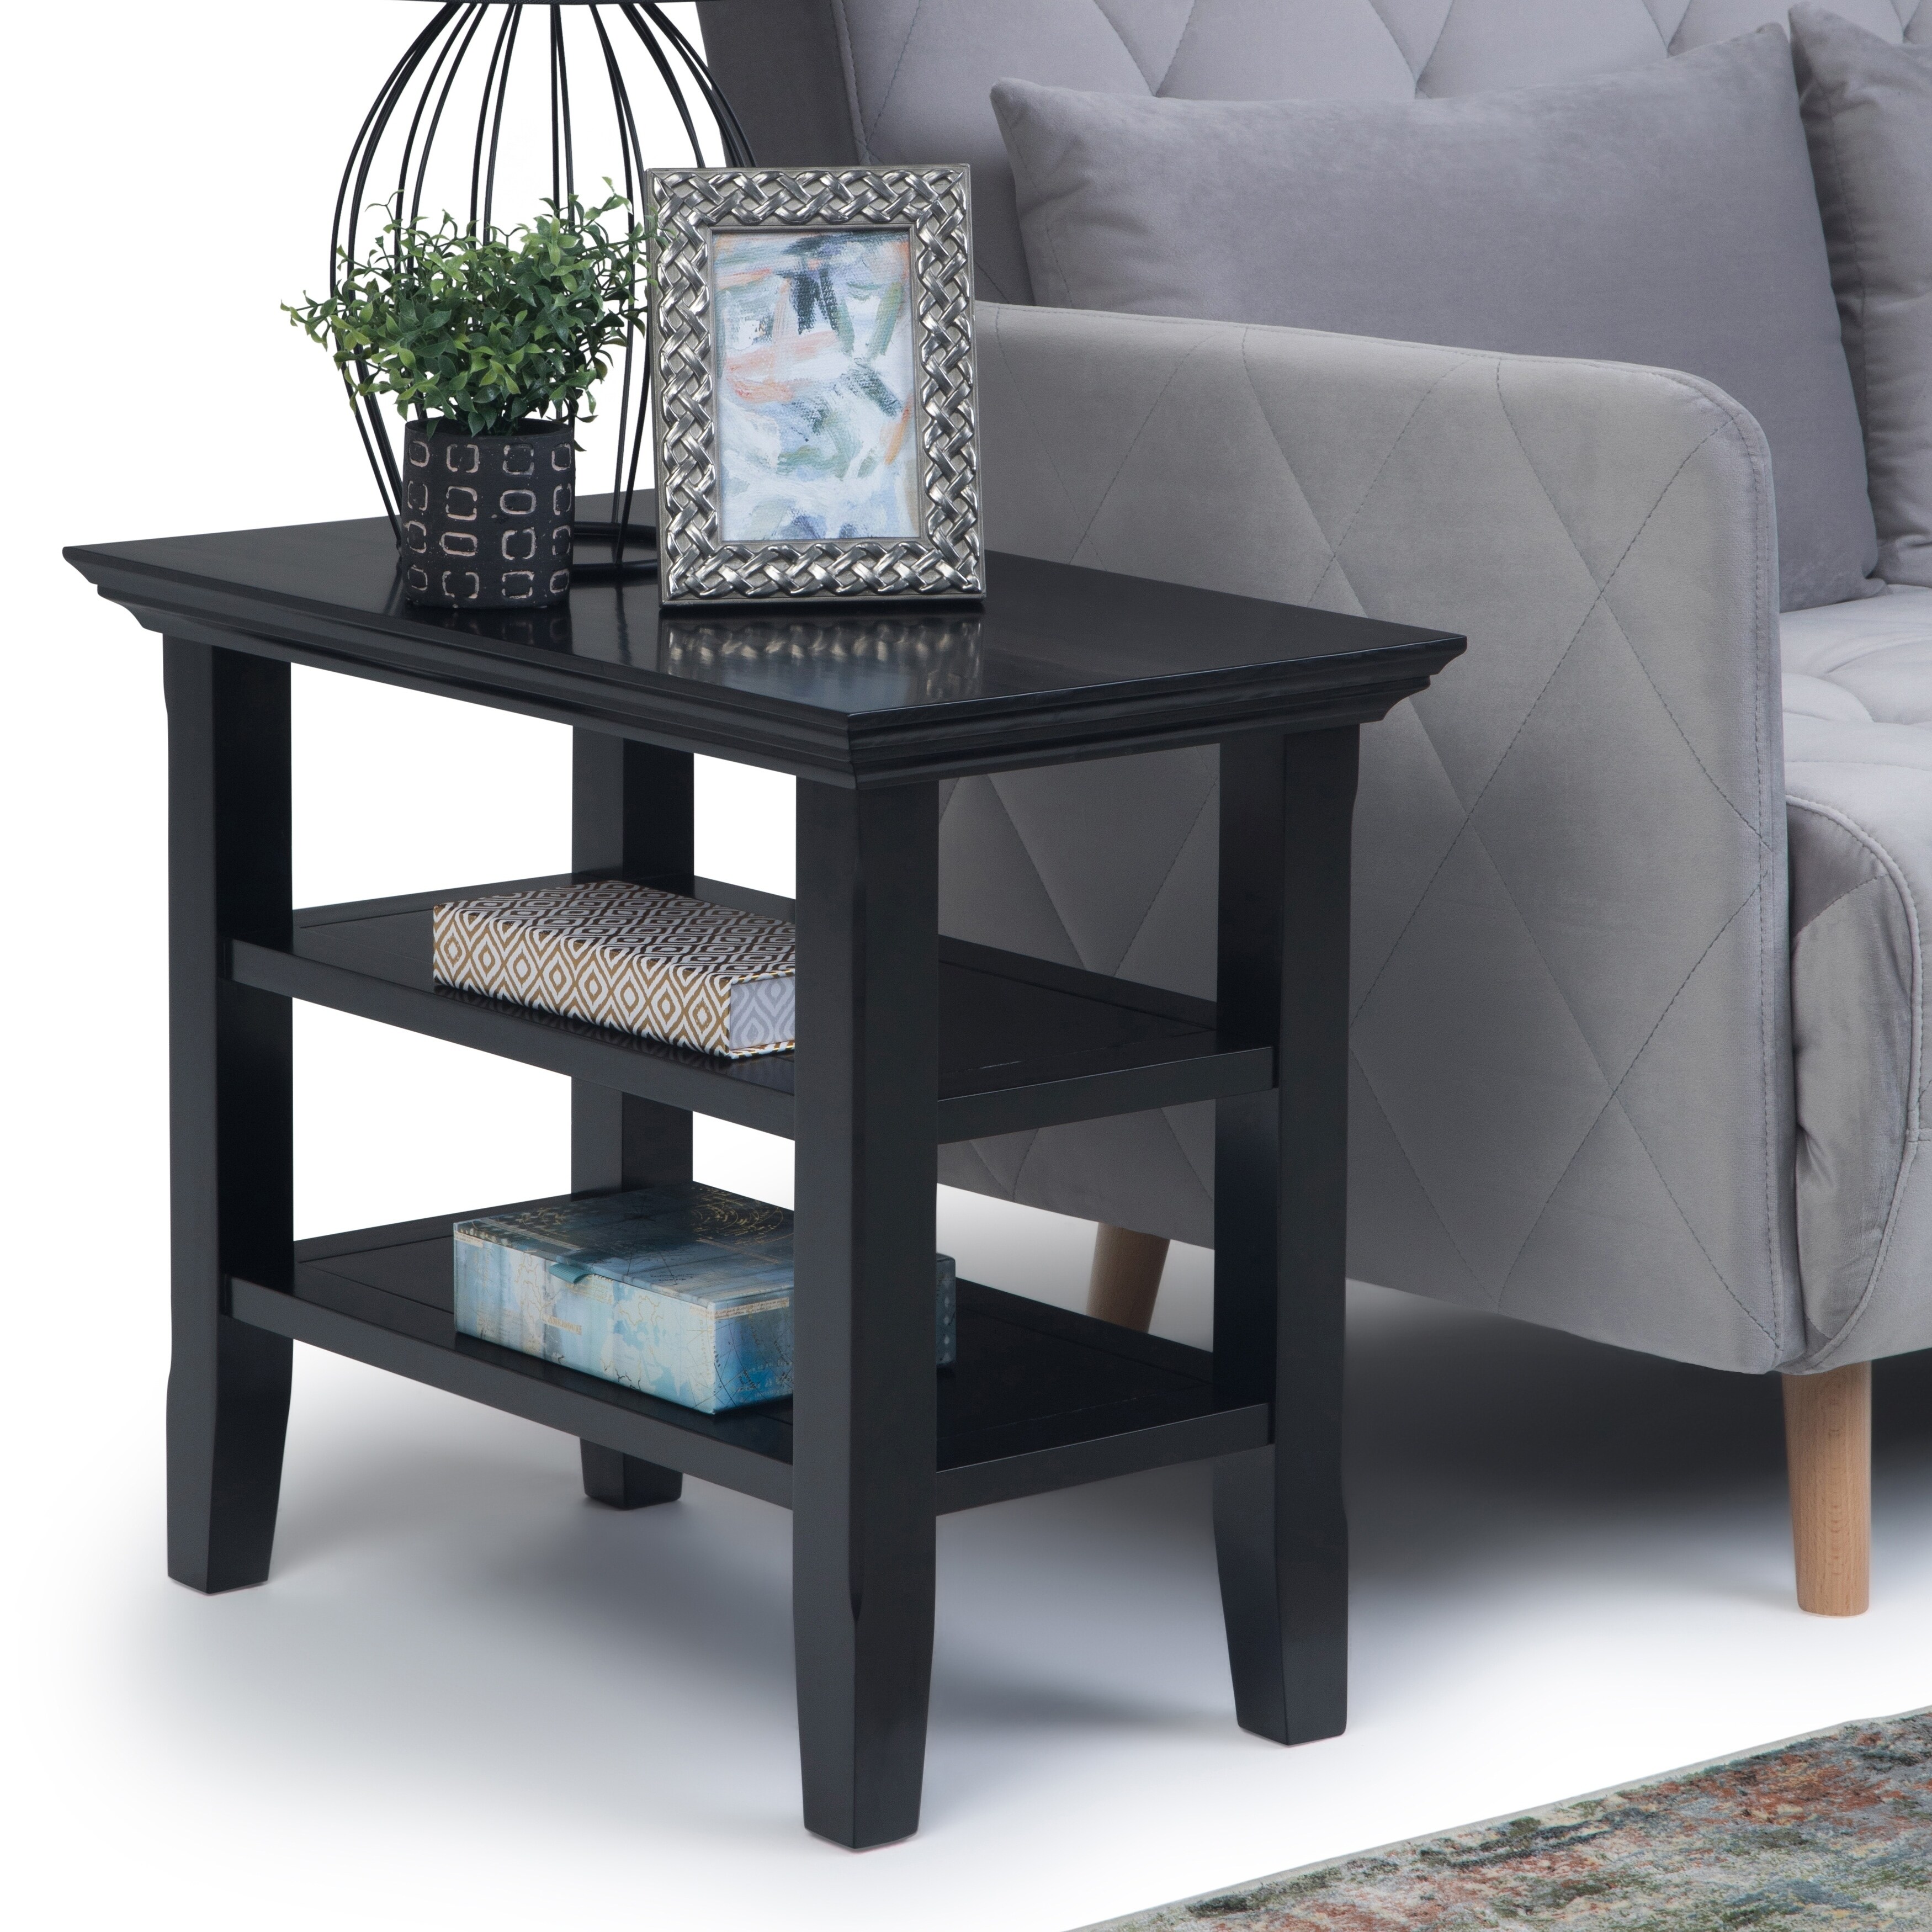 Solid Wood Side End Table Small Narrow Tall Slim for Sofa Bed LivingRoom Bedroom